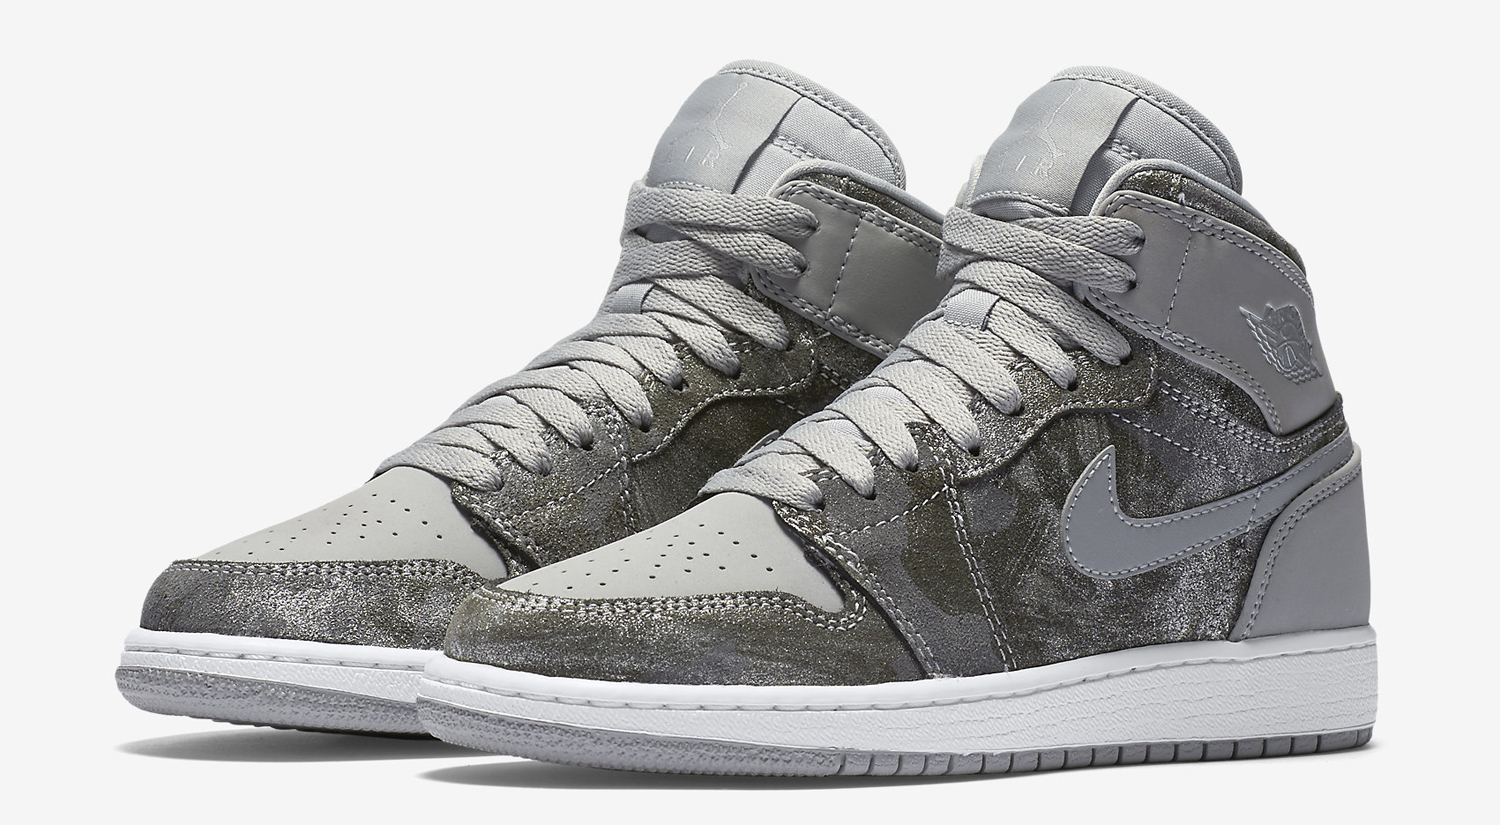 This Air Jordan 1 Releases on All-Star 